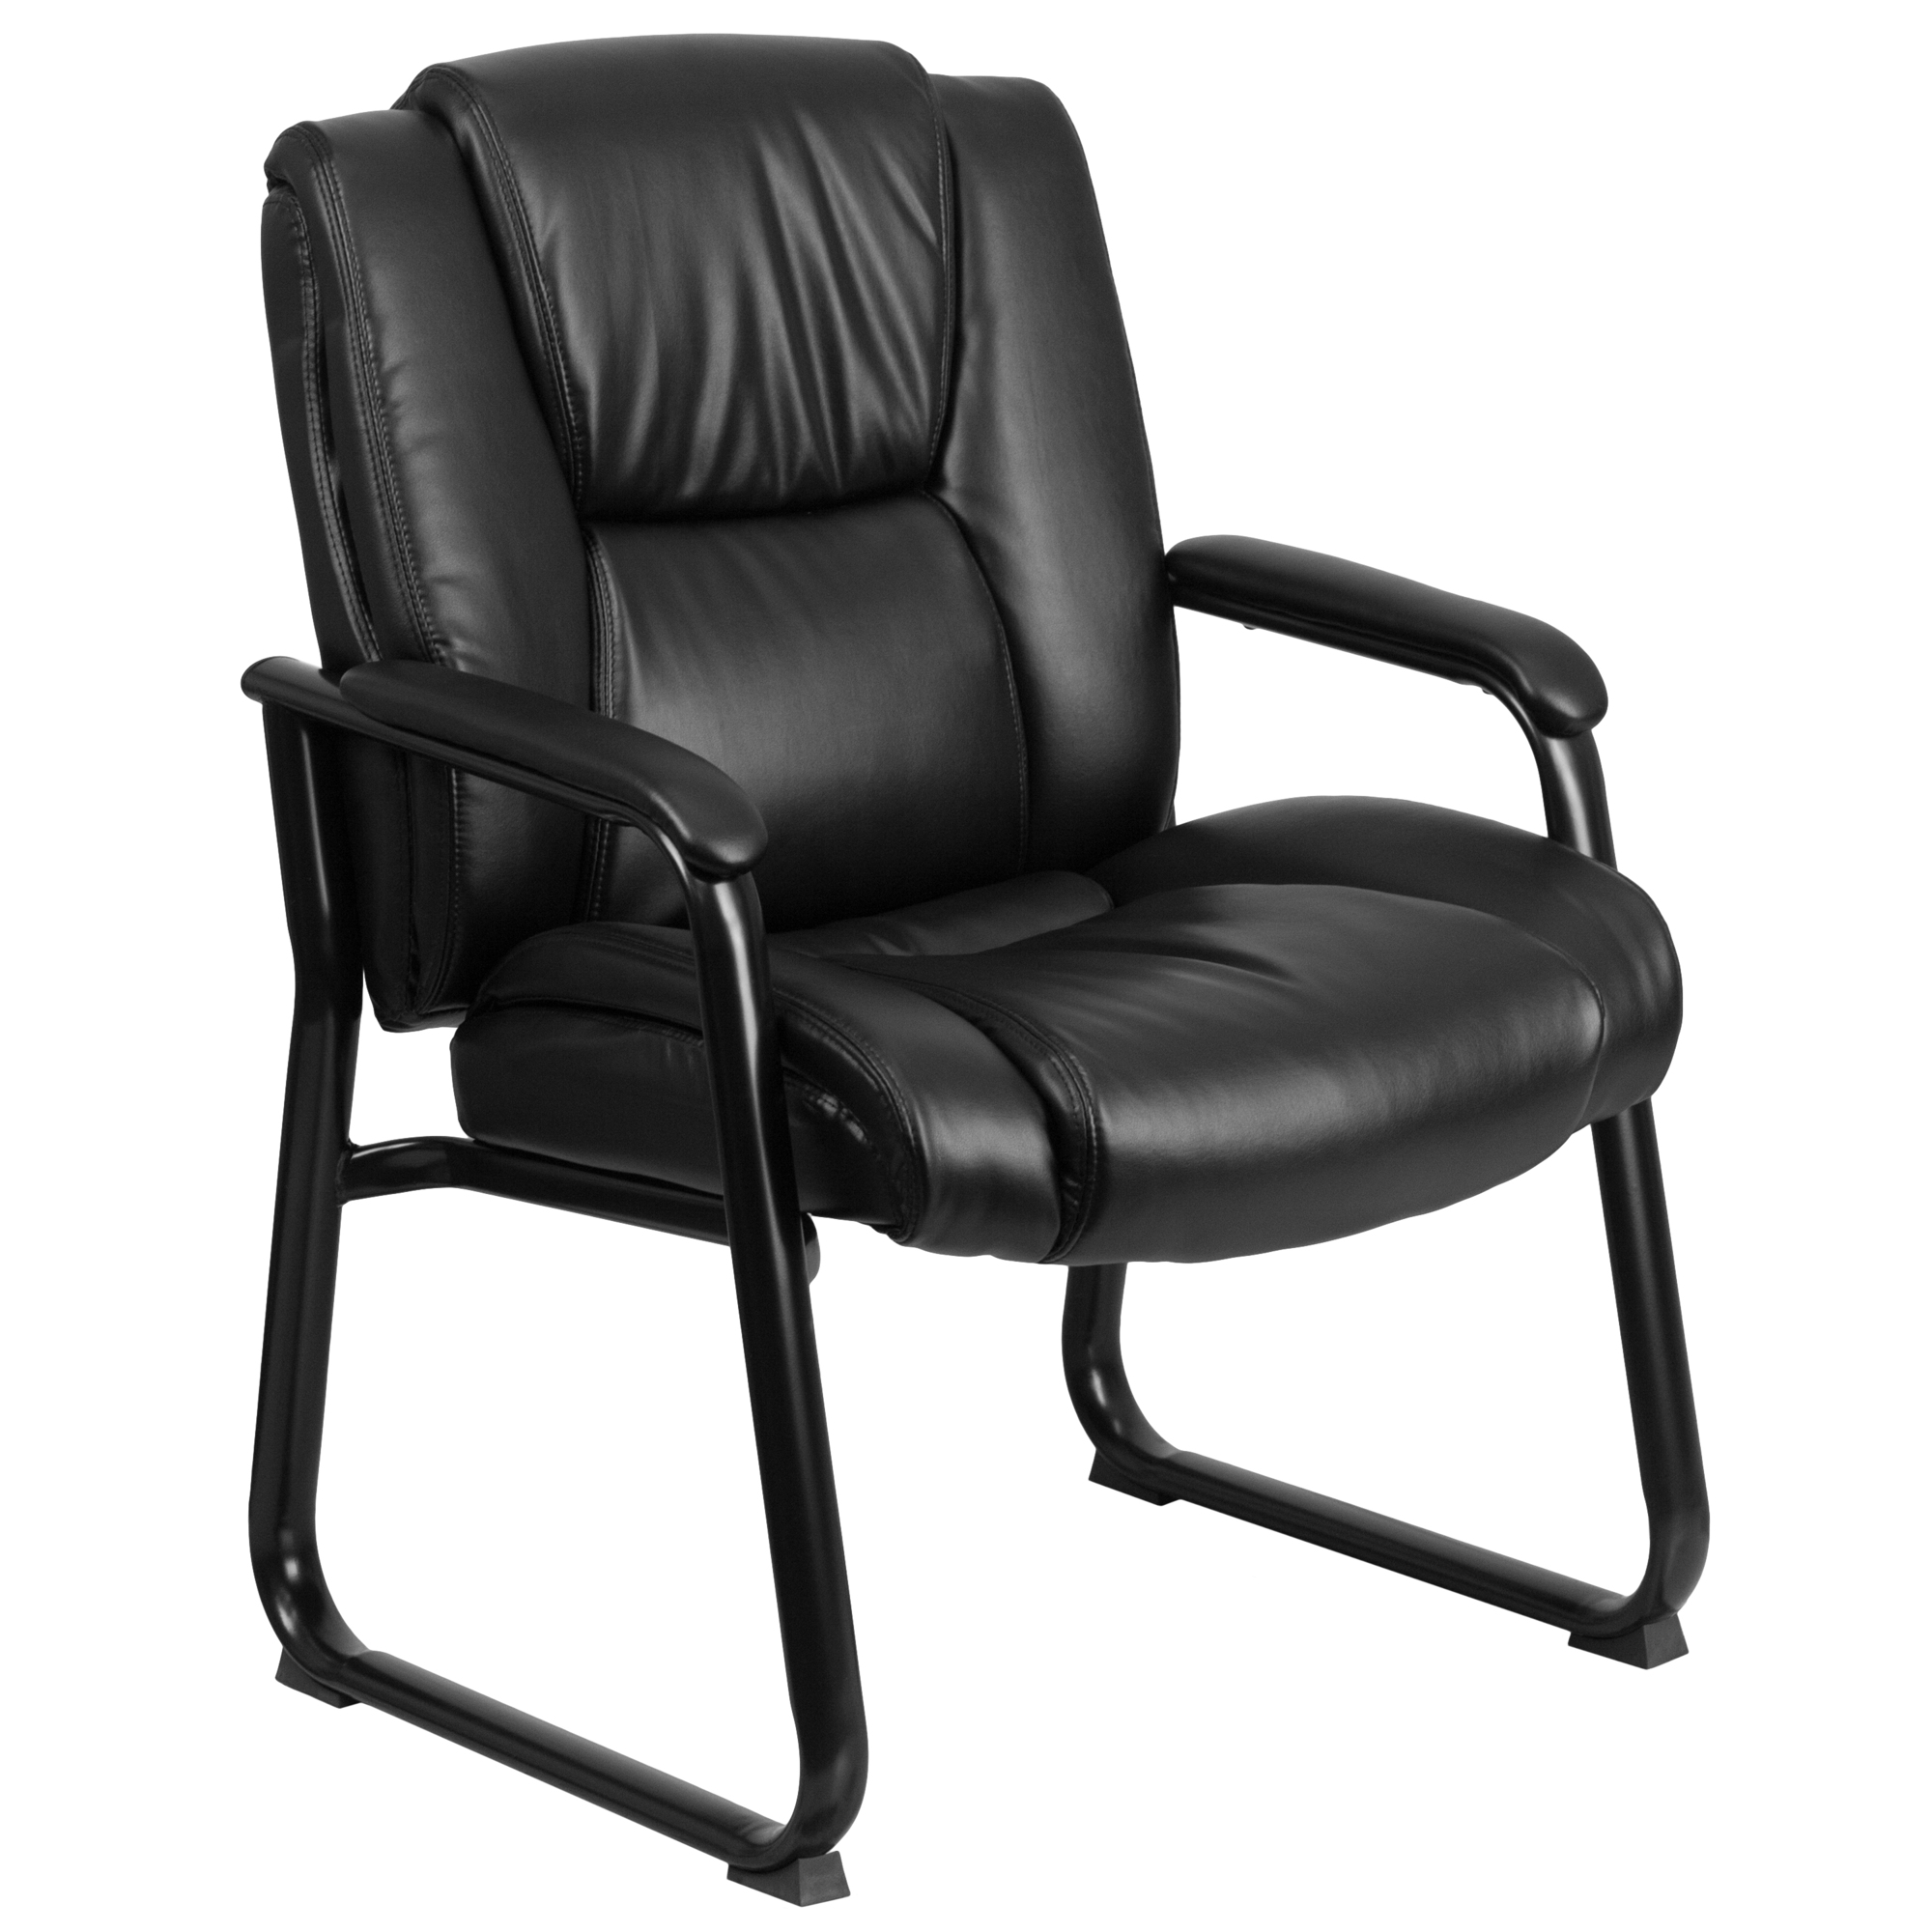 Flash Furniture, Big Tall 500 lb. Rated Black LeatherSoft Chair, Primary Color Black, Included (qty.) 1, Model GO2138